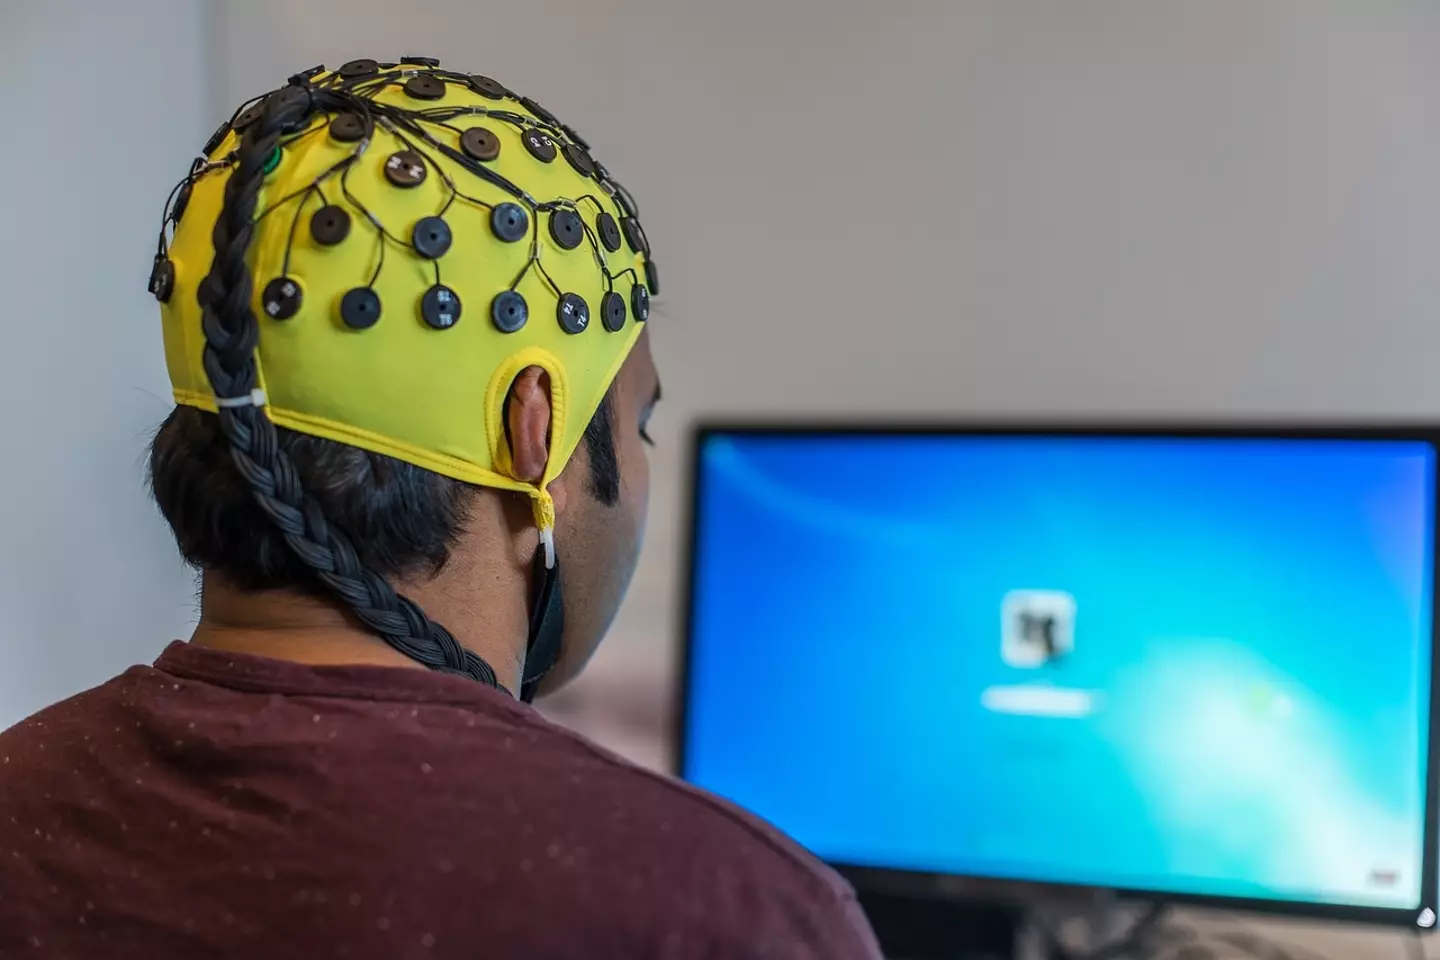 A patient was hooked up to an EEG before death which recorded his brain activity.